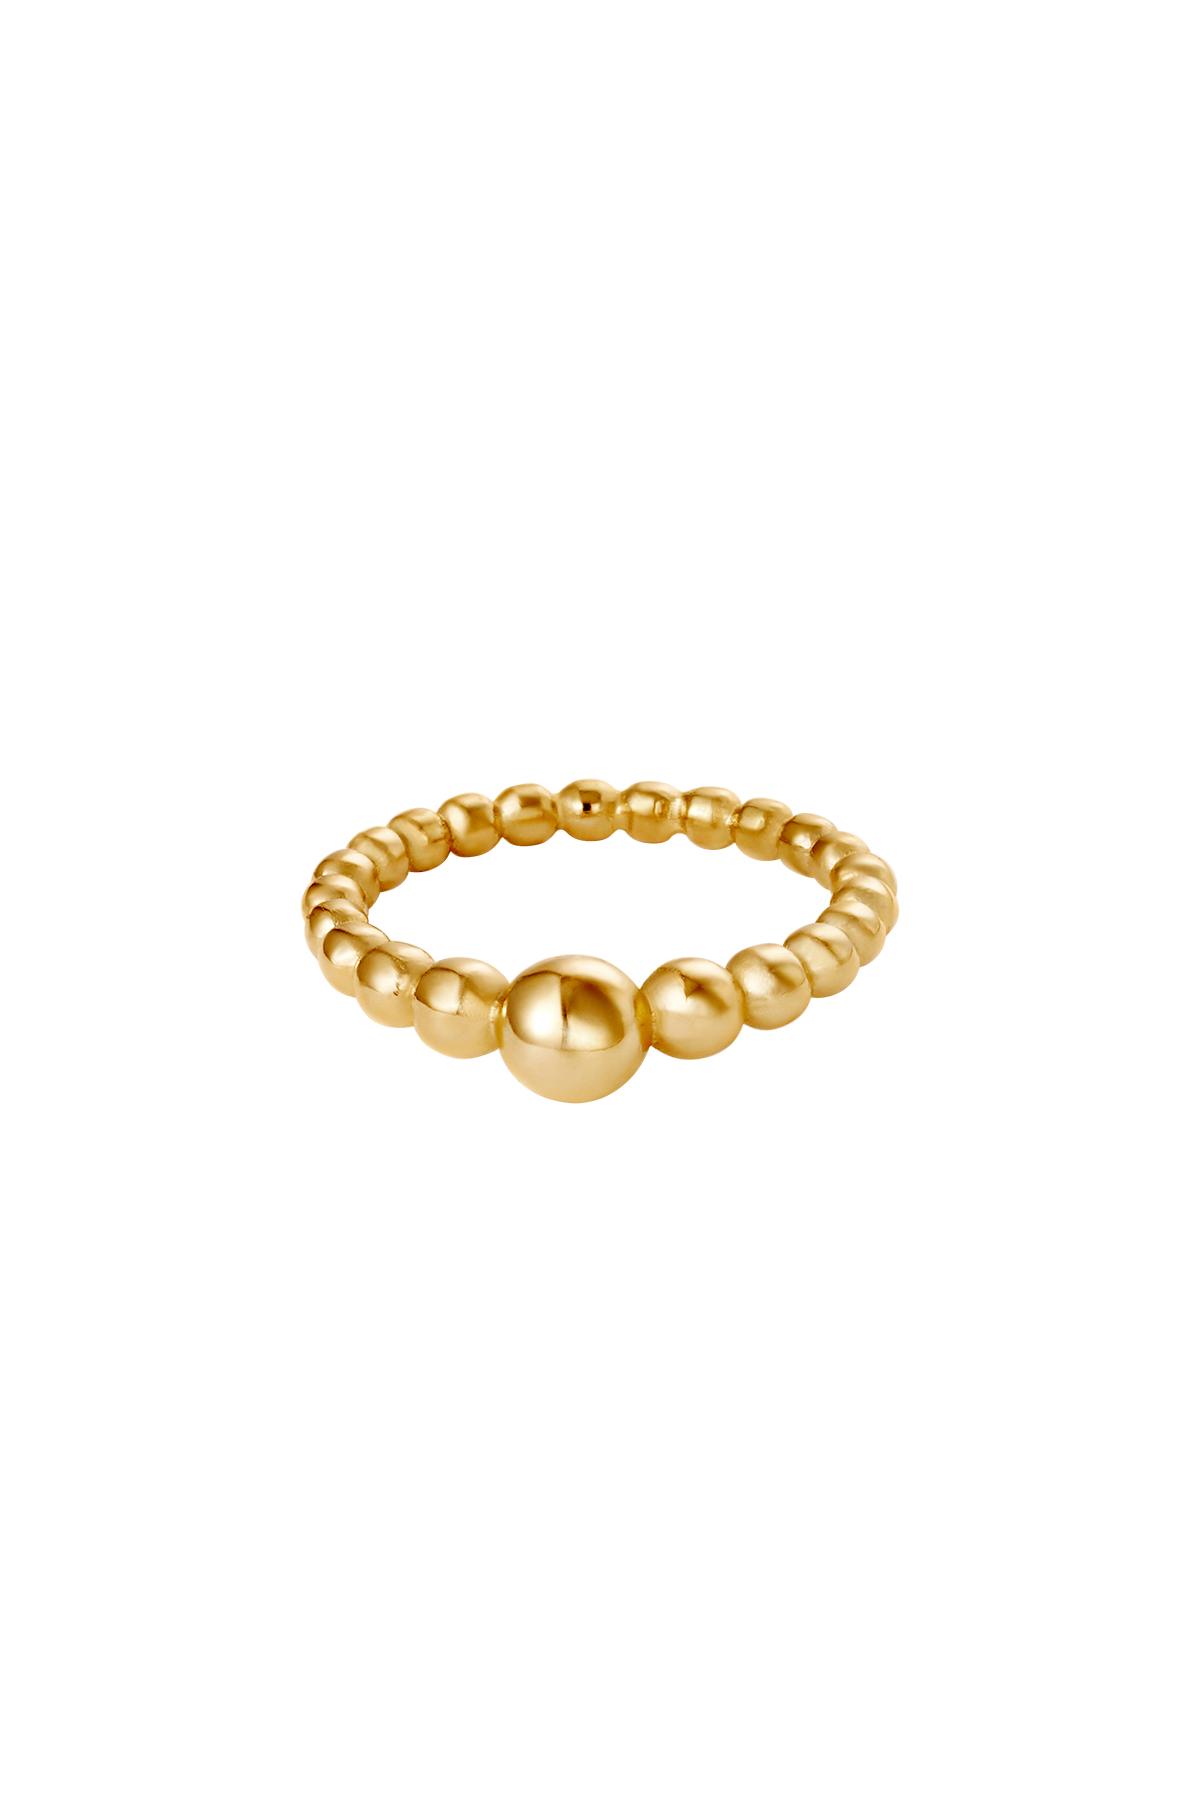 Gold / 18 / Anello Perle Acciaio Gold Stainless Steel 18 Immagine2